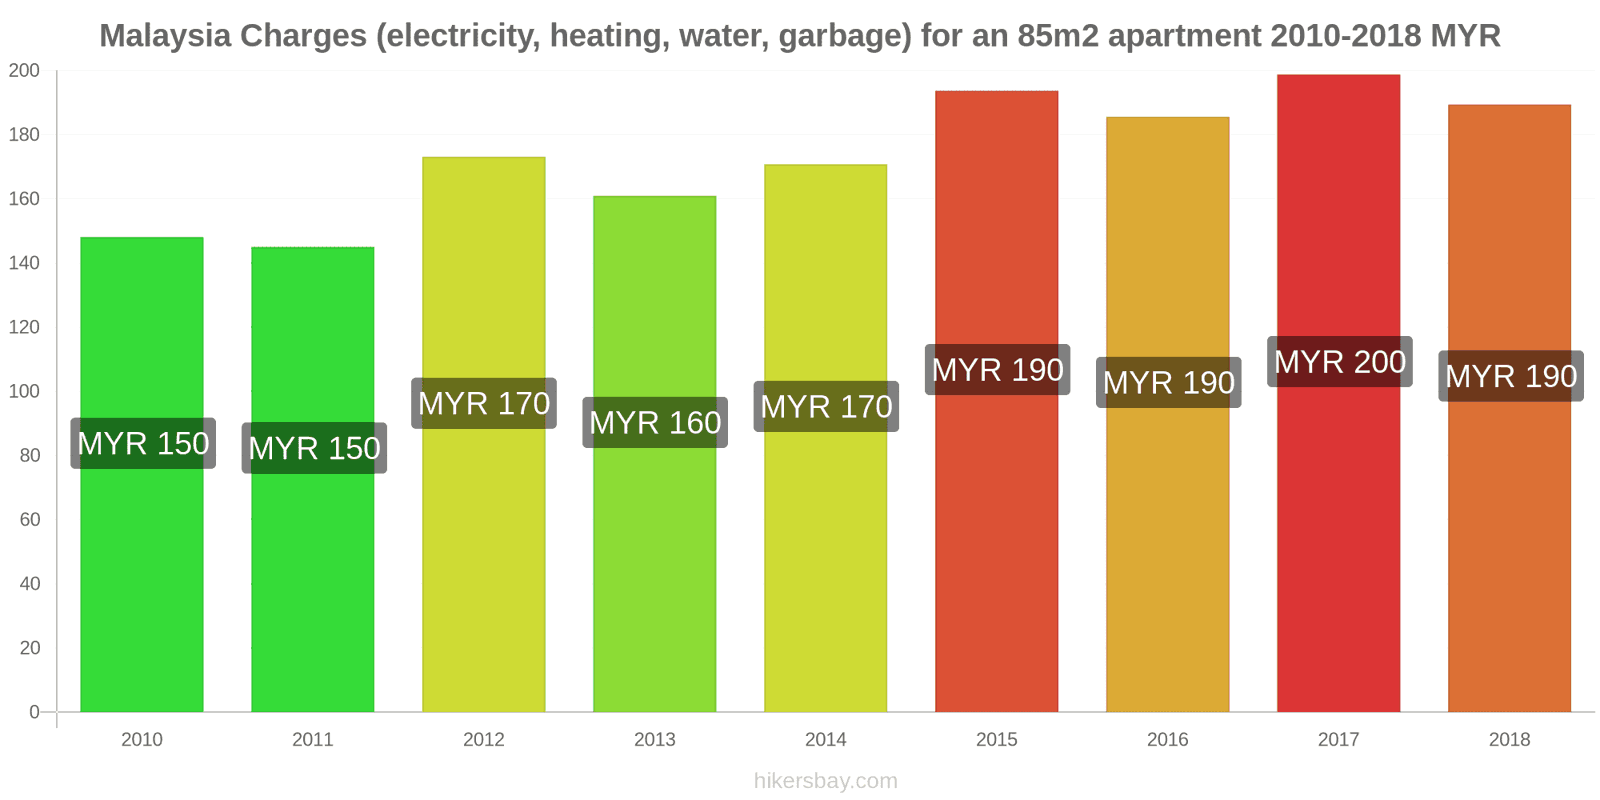 Malaysia price changes Utilities (electricity, heating, water, garbage) for an 85m2 apartment hikersbay.com